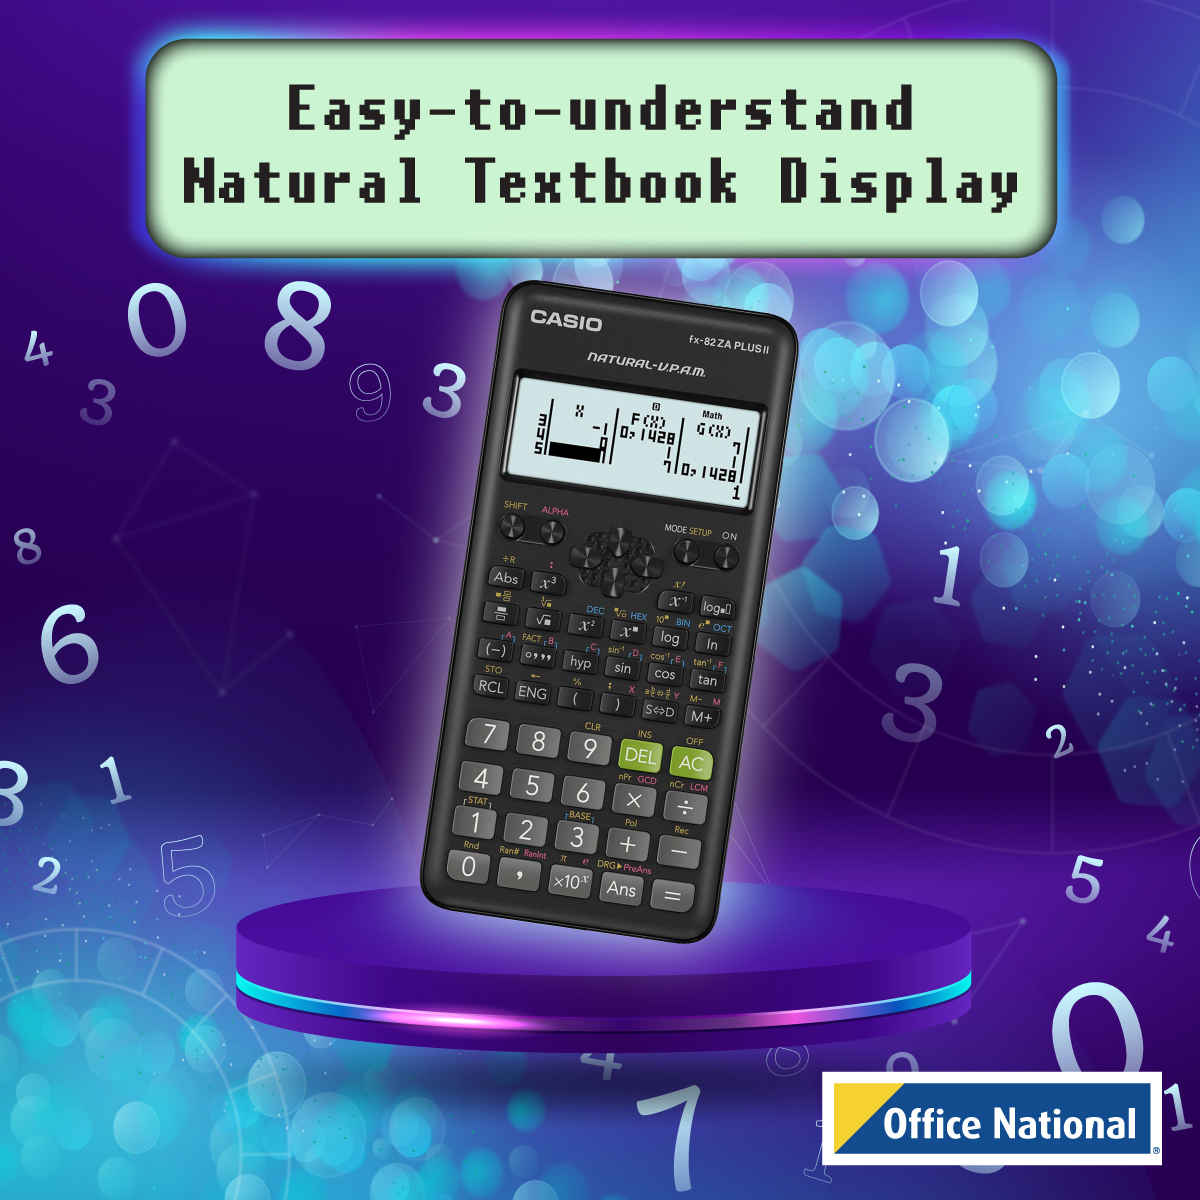 The Casio FX82ZA Plus Scientific Calculator has a natural textbook display. Equations and calculations are displayed in a format that replicates show they appear in textbooks.
#EducationalResources #Casio#ScientificCalculator